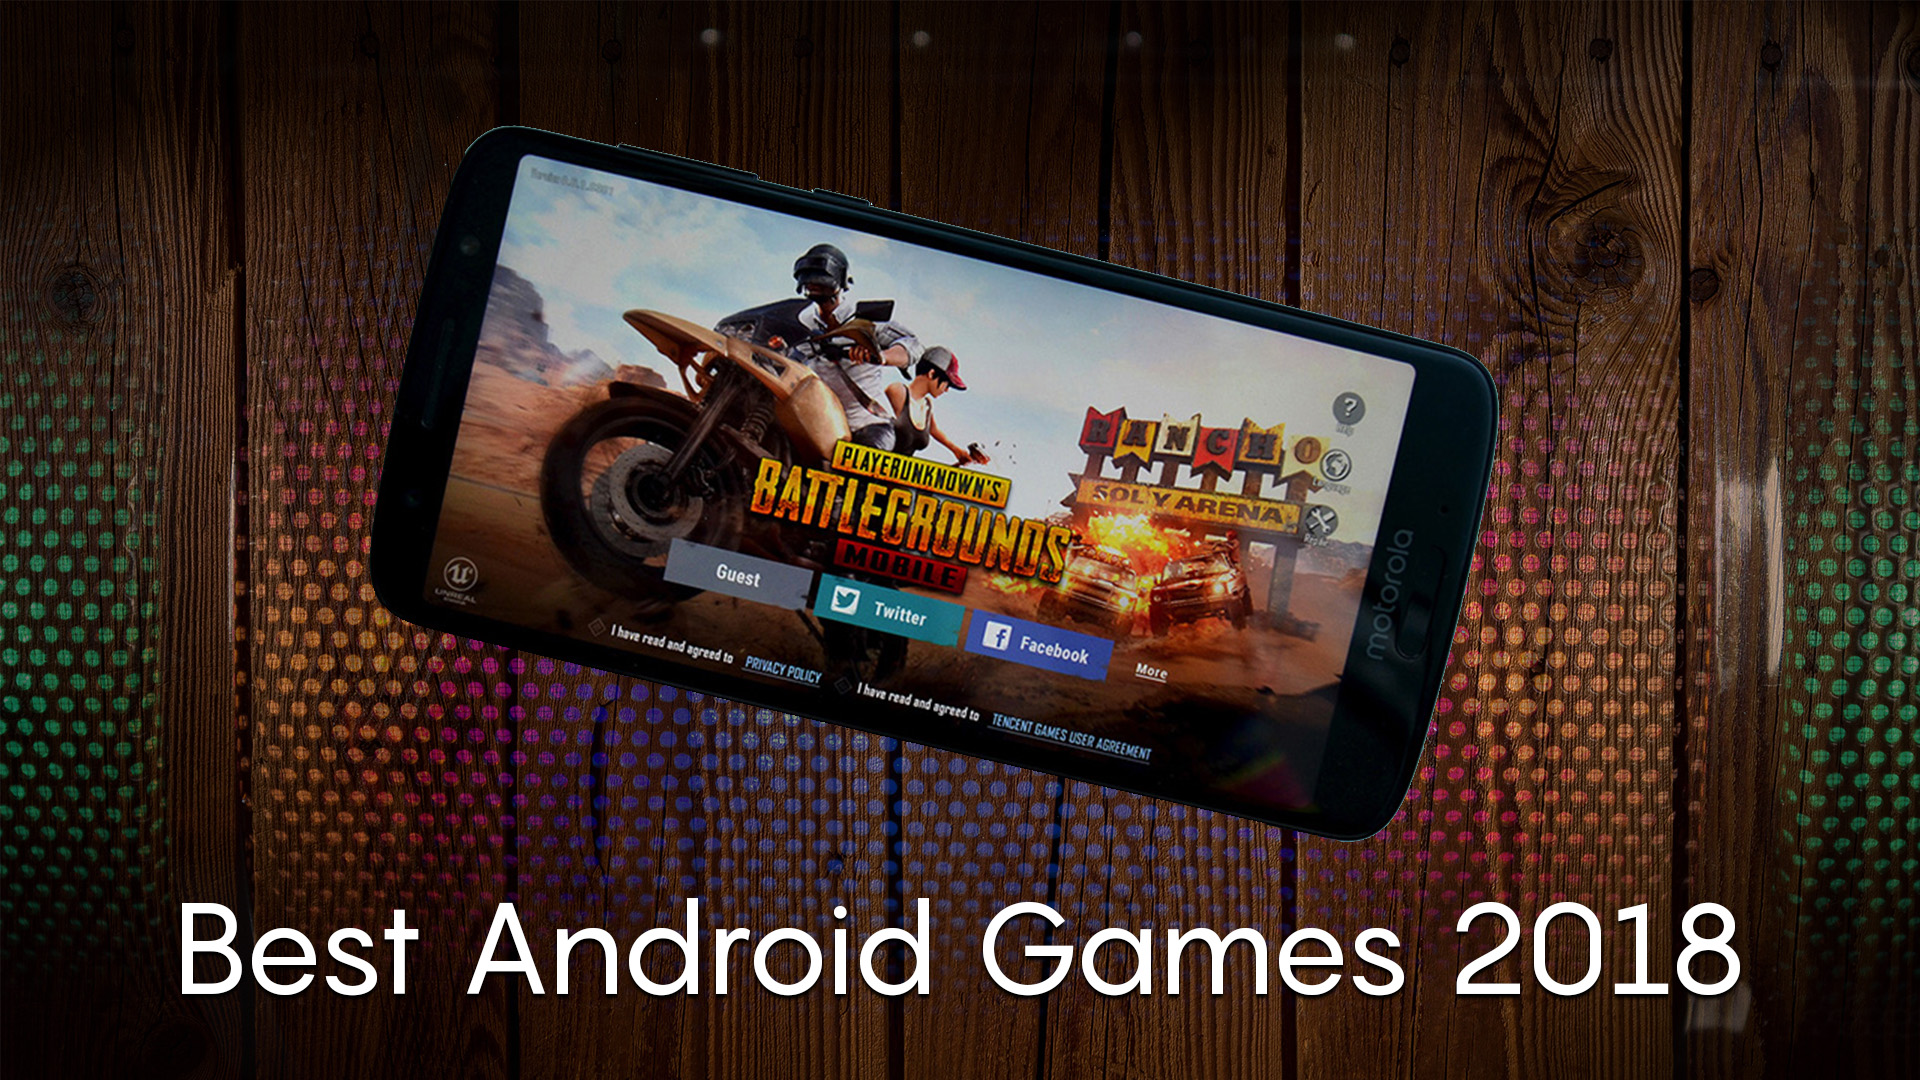 This is the featured image for the best Android Games from 2018